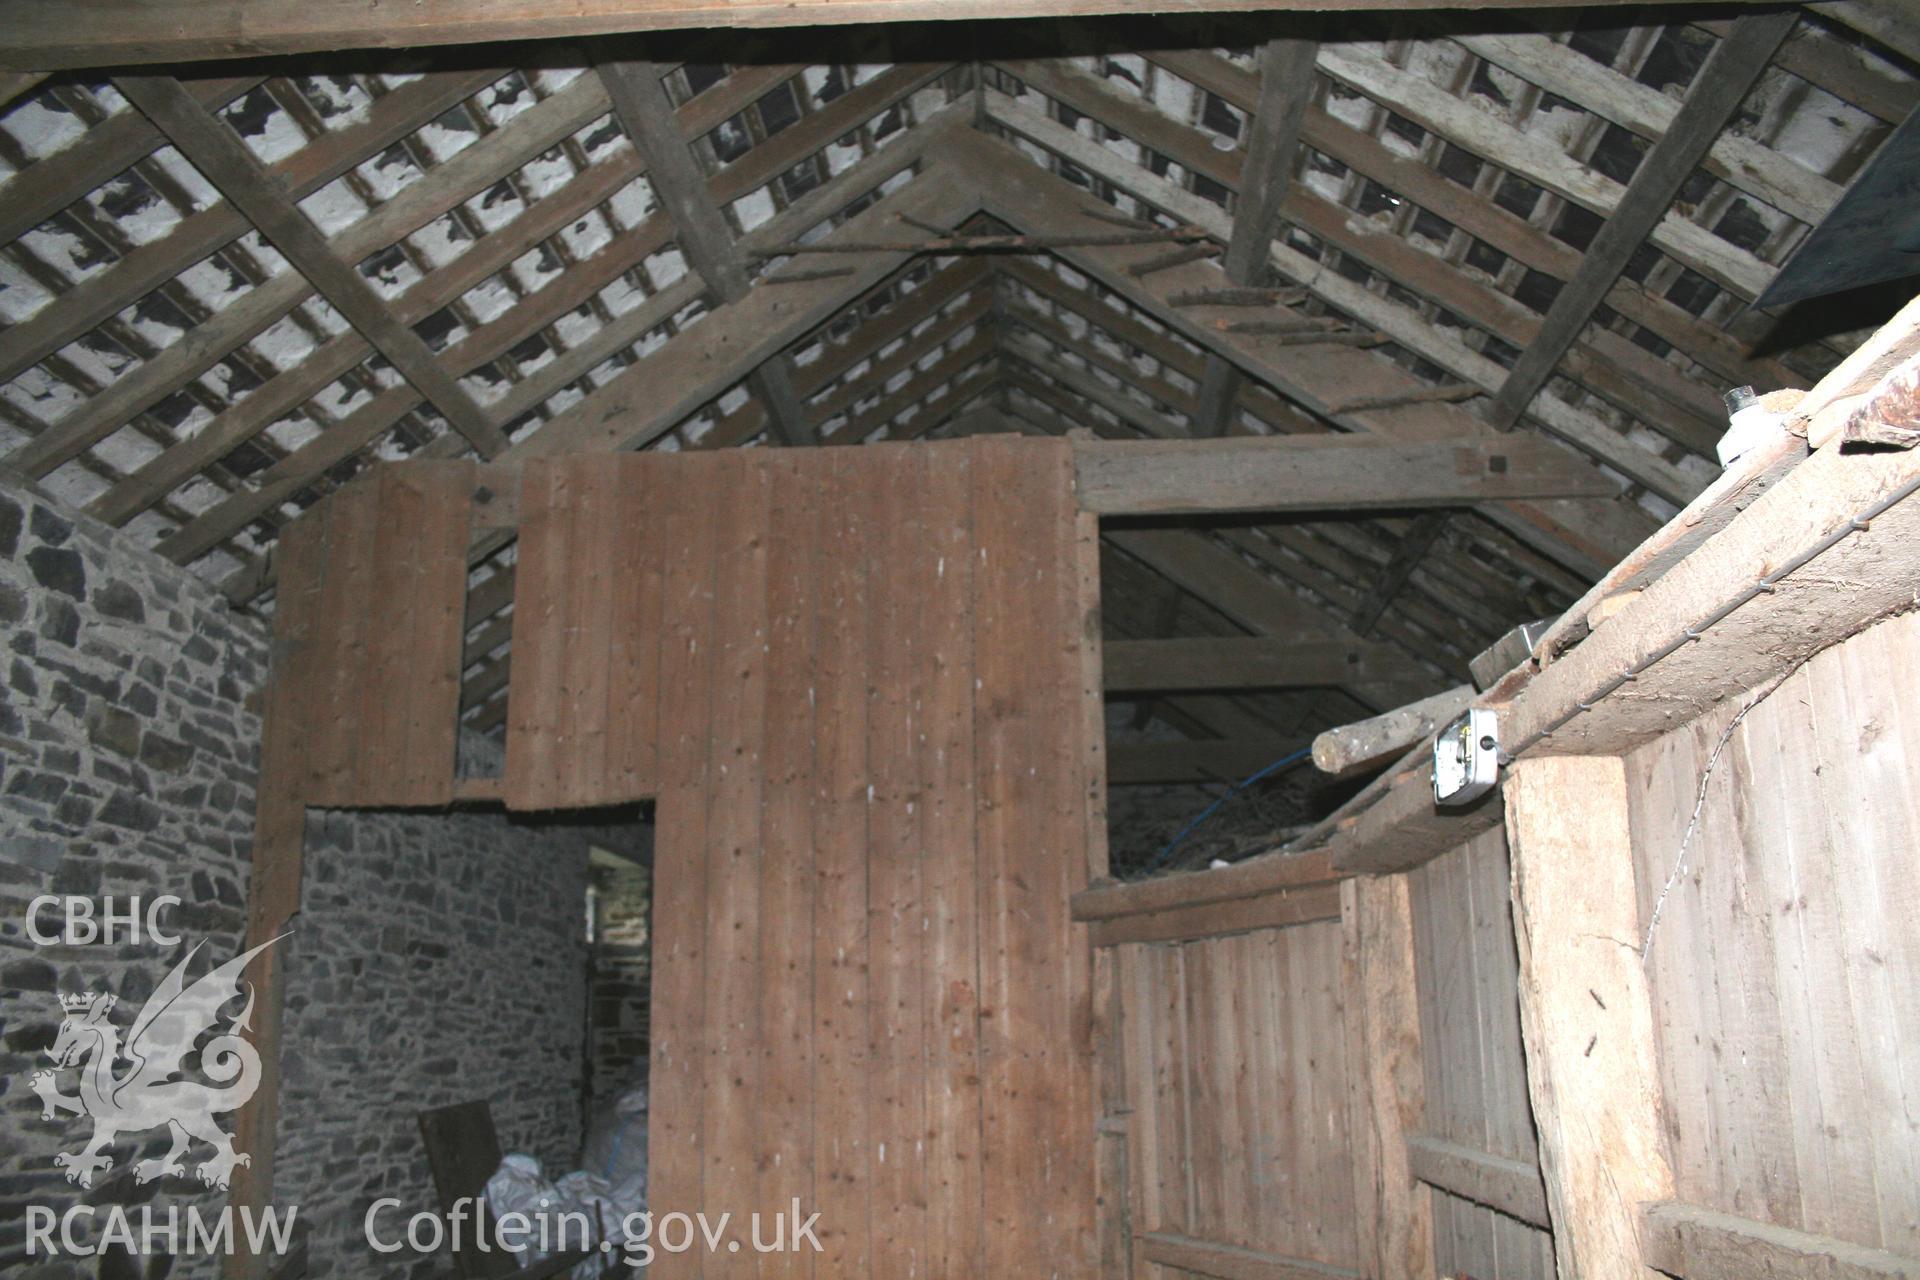 Interior view of stone walls, wooden roof beams and wooden partitions.Photographic survey of the northern range of cattle-shelters at Tan-y-Graig Farm, Llanfarian, conducted by Geoff Ward and John Wiles, 11th December 2006.